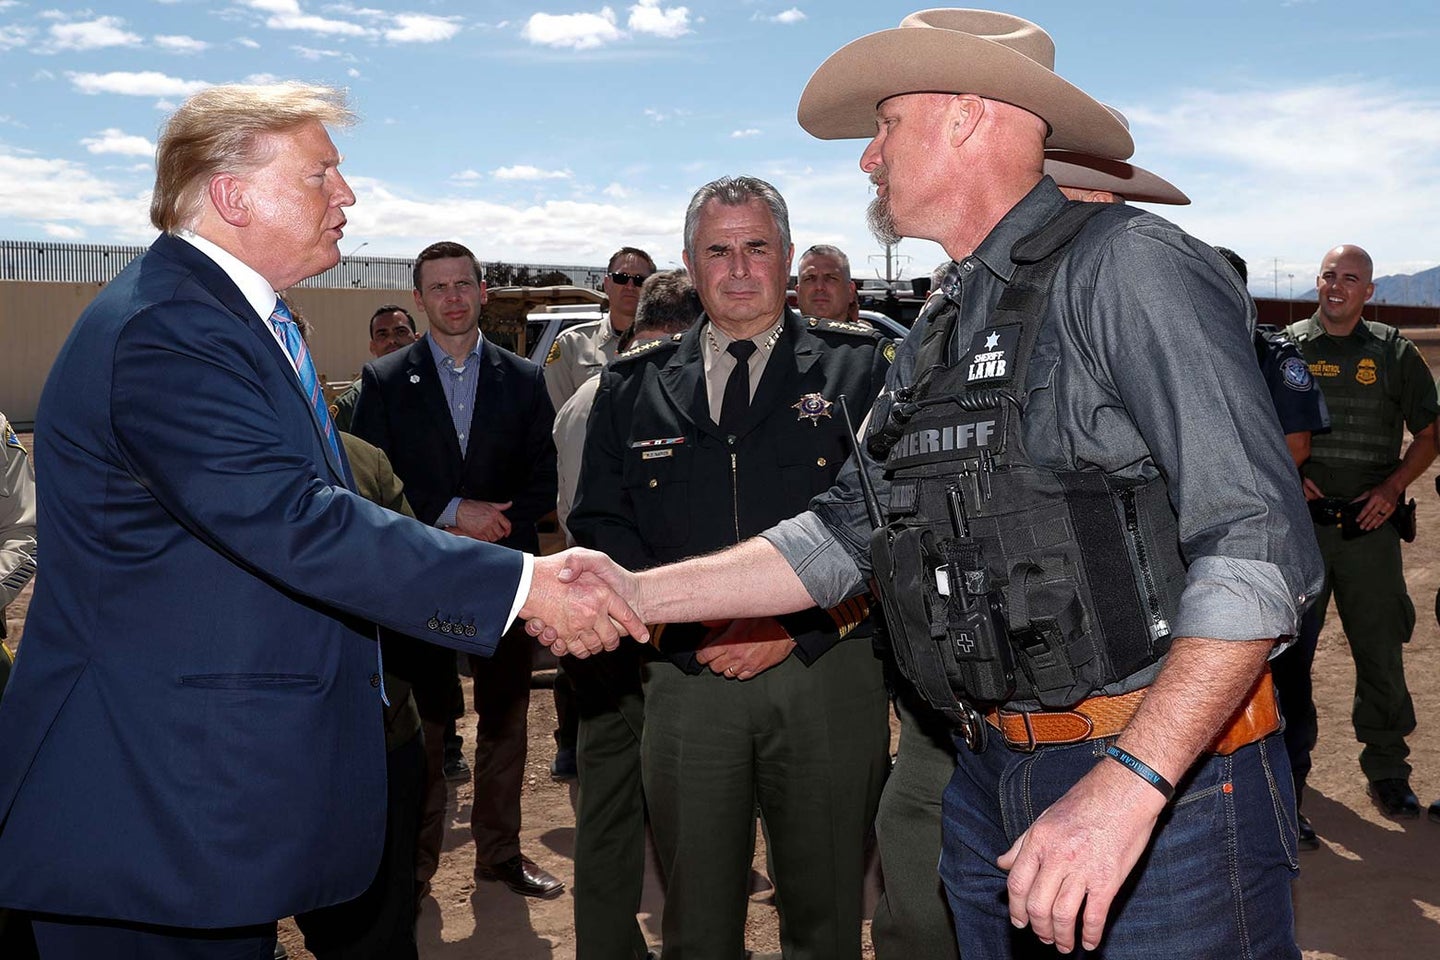 Sheriffs, the Capitol riot, and right-wing militias: Sheriffs helped